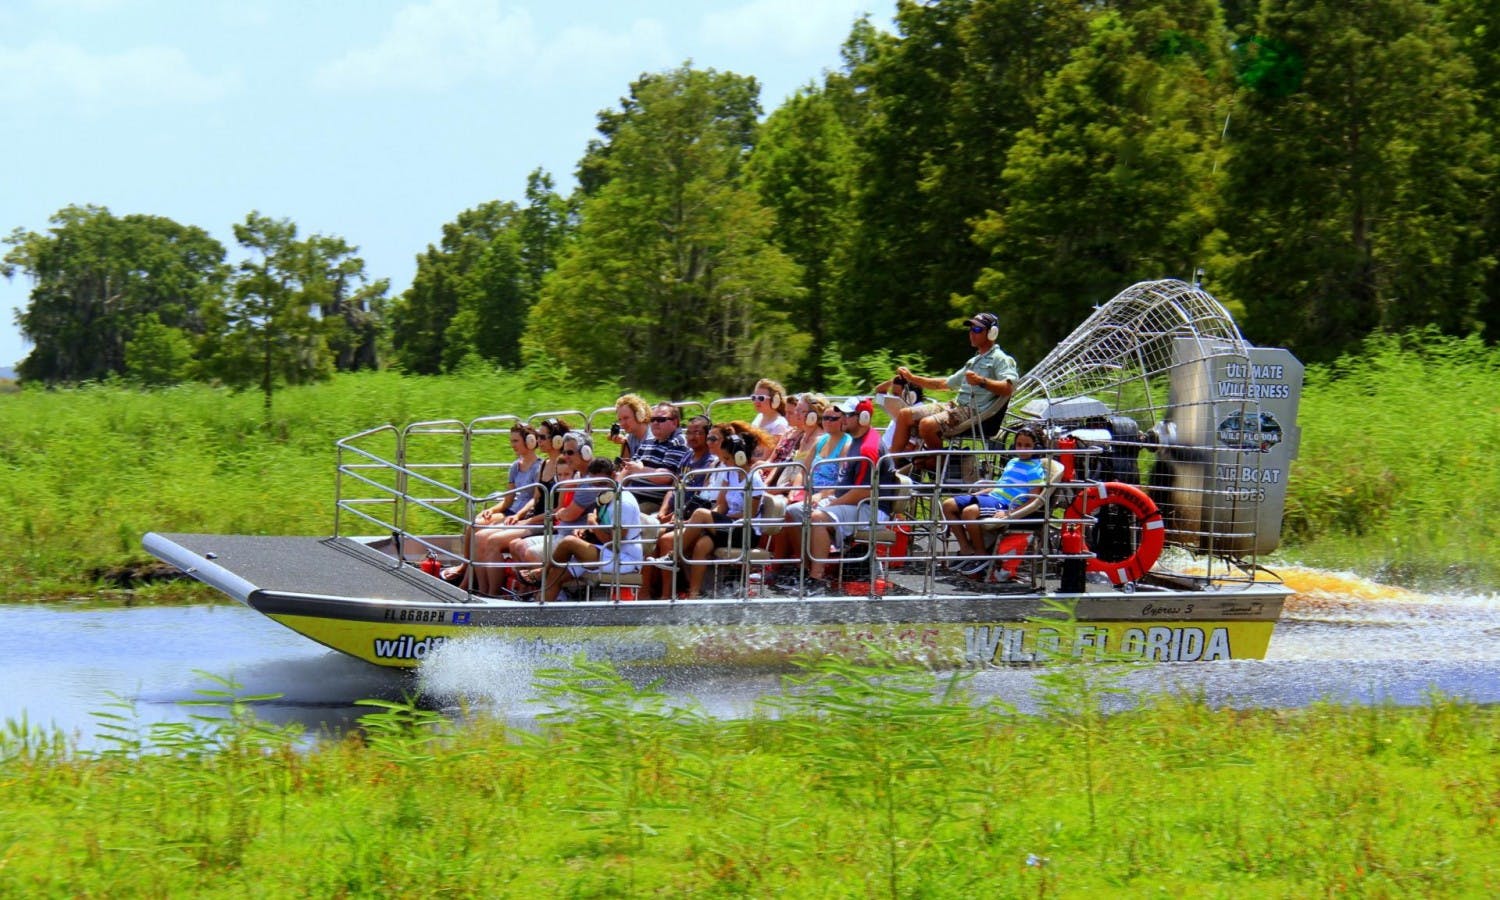 Wild Florida ultimate airboat ride with transportation from Orlando Musement